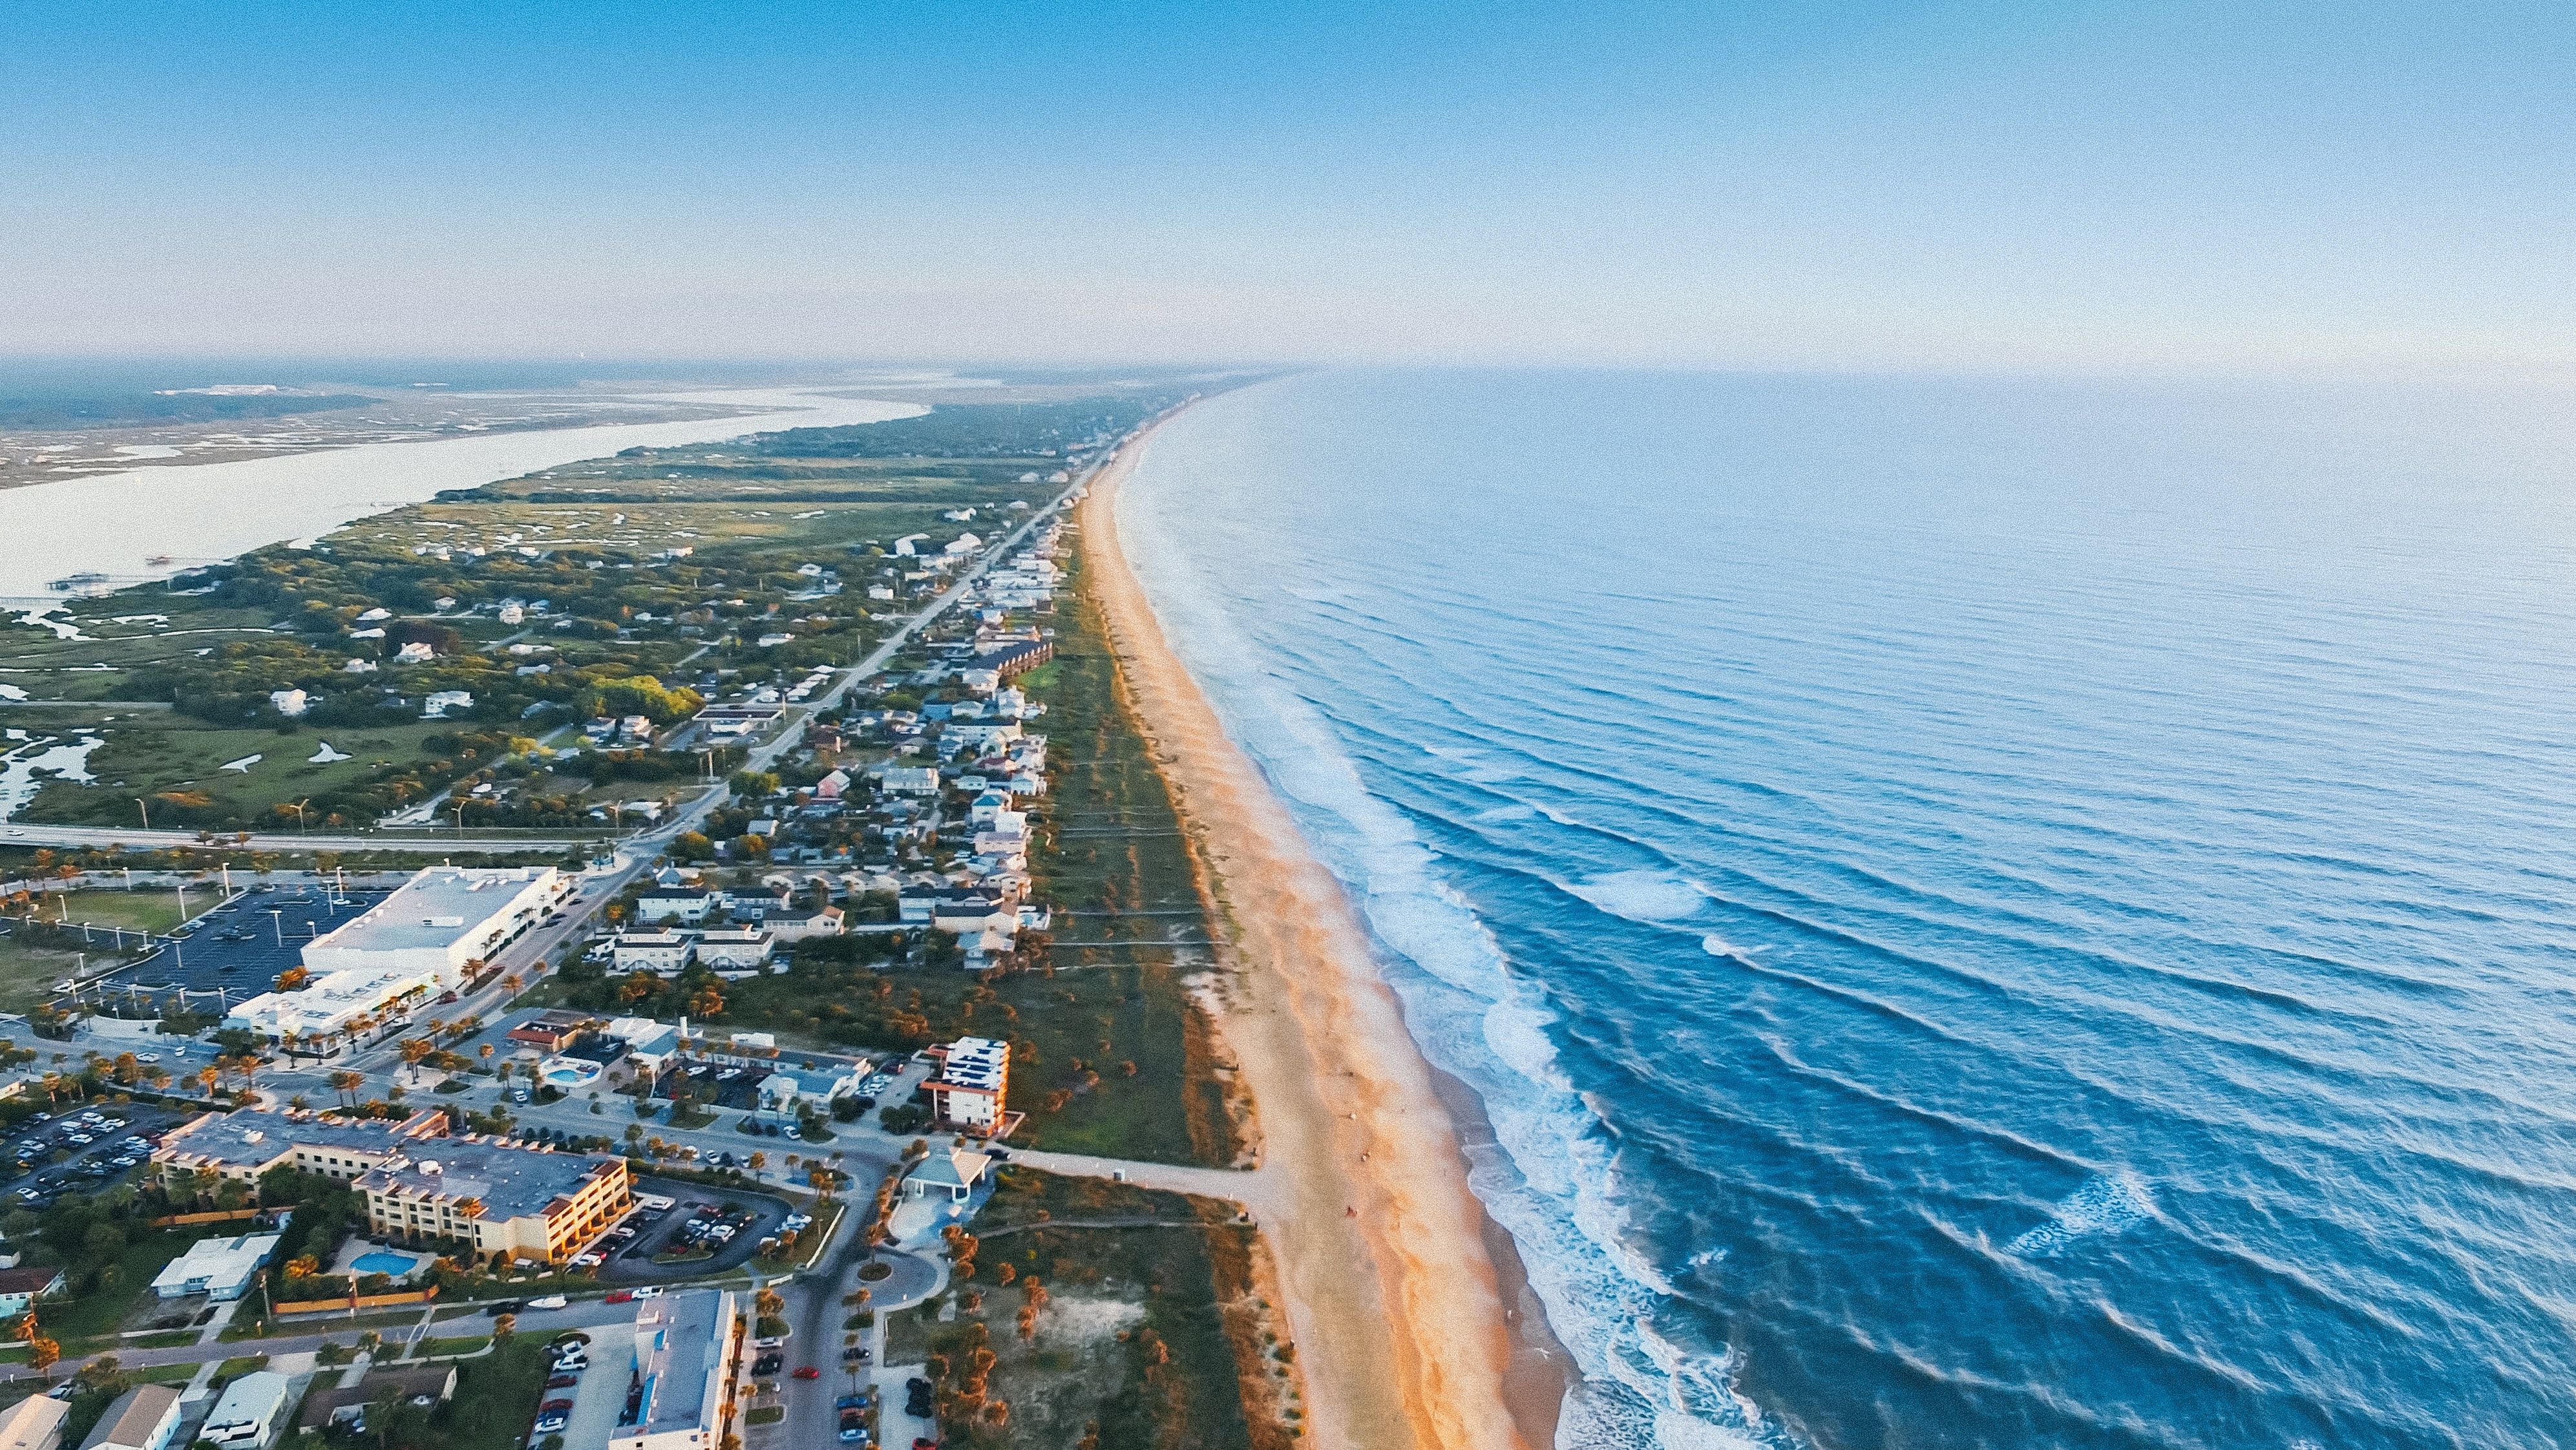 An aerial view of the St. Augustine Coastline in Florida